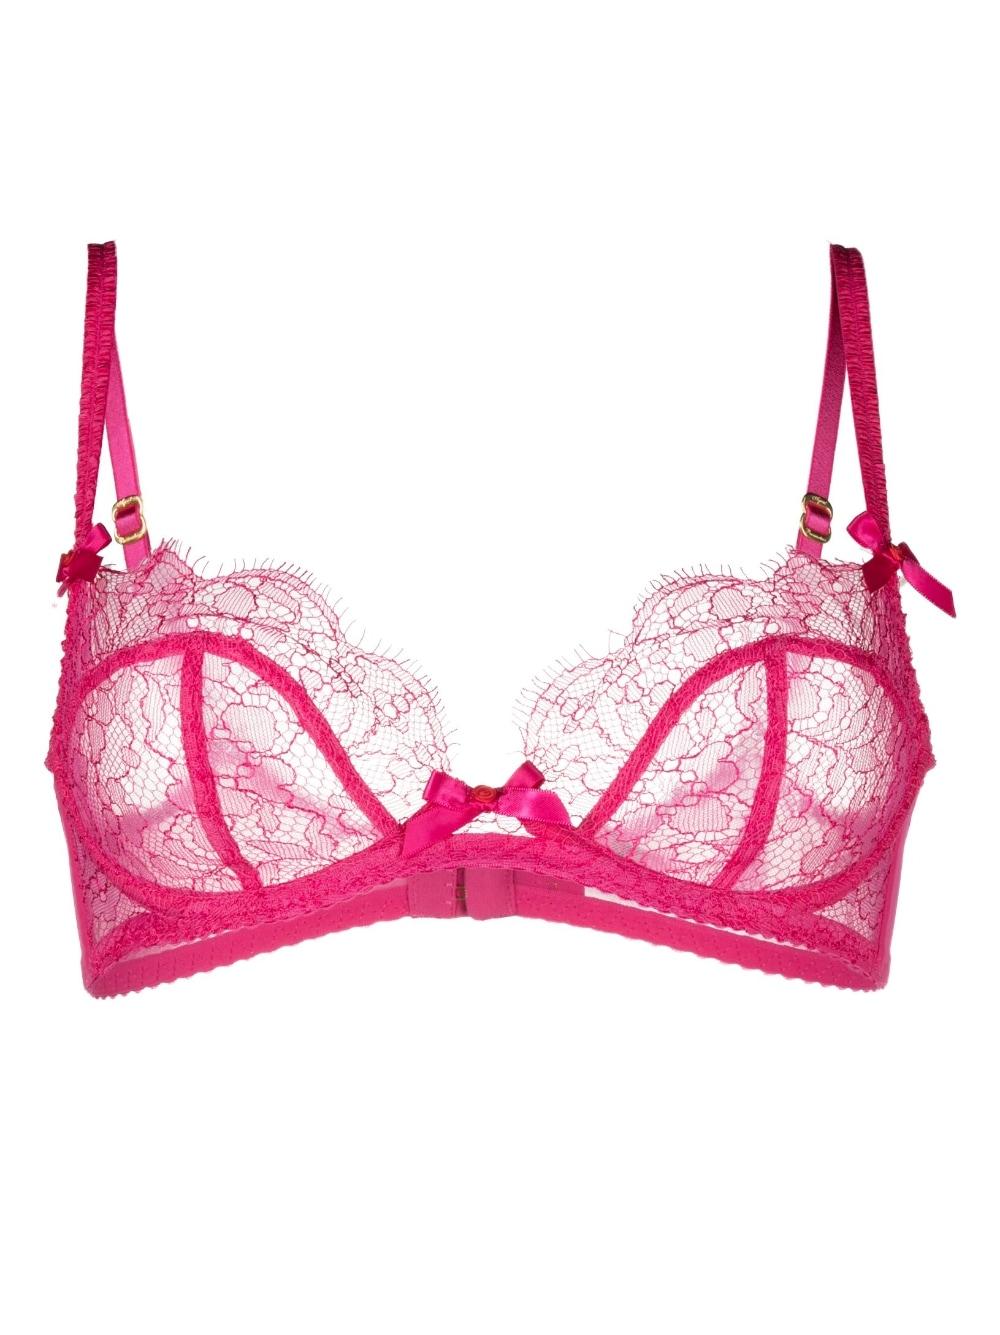 Agent Provocateur Lorna Lace Plunge Underwired Bra in Pink